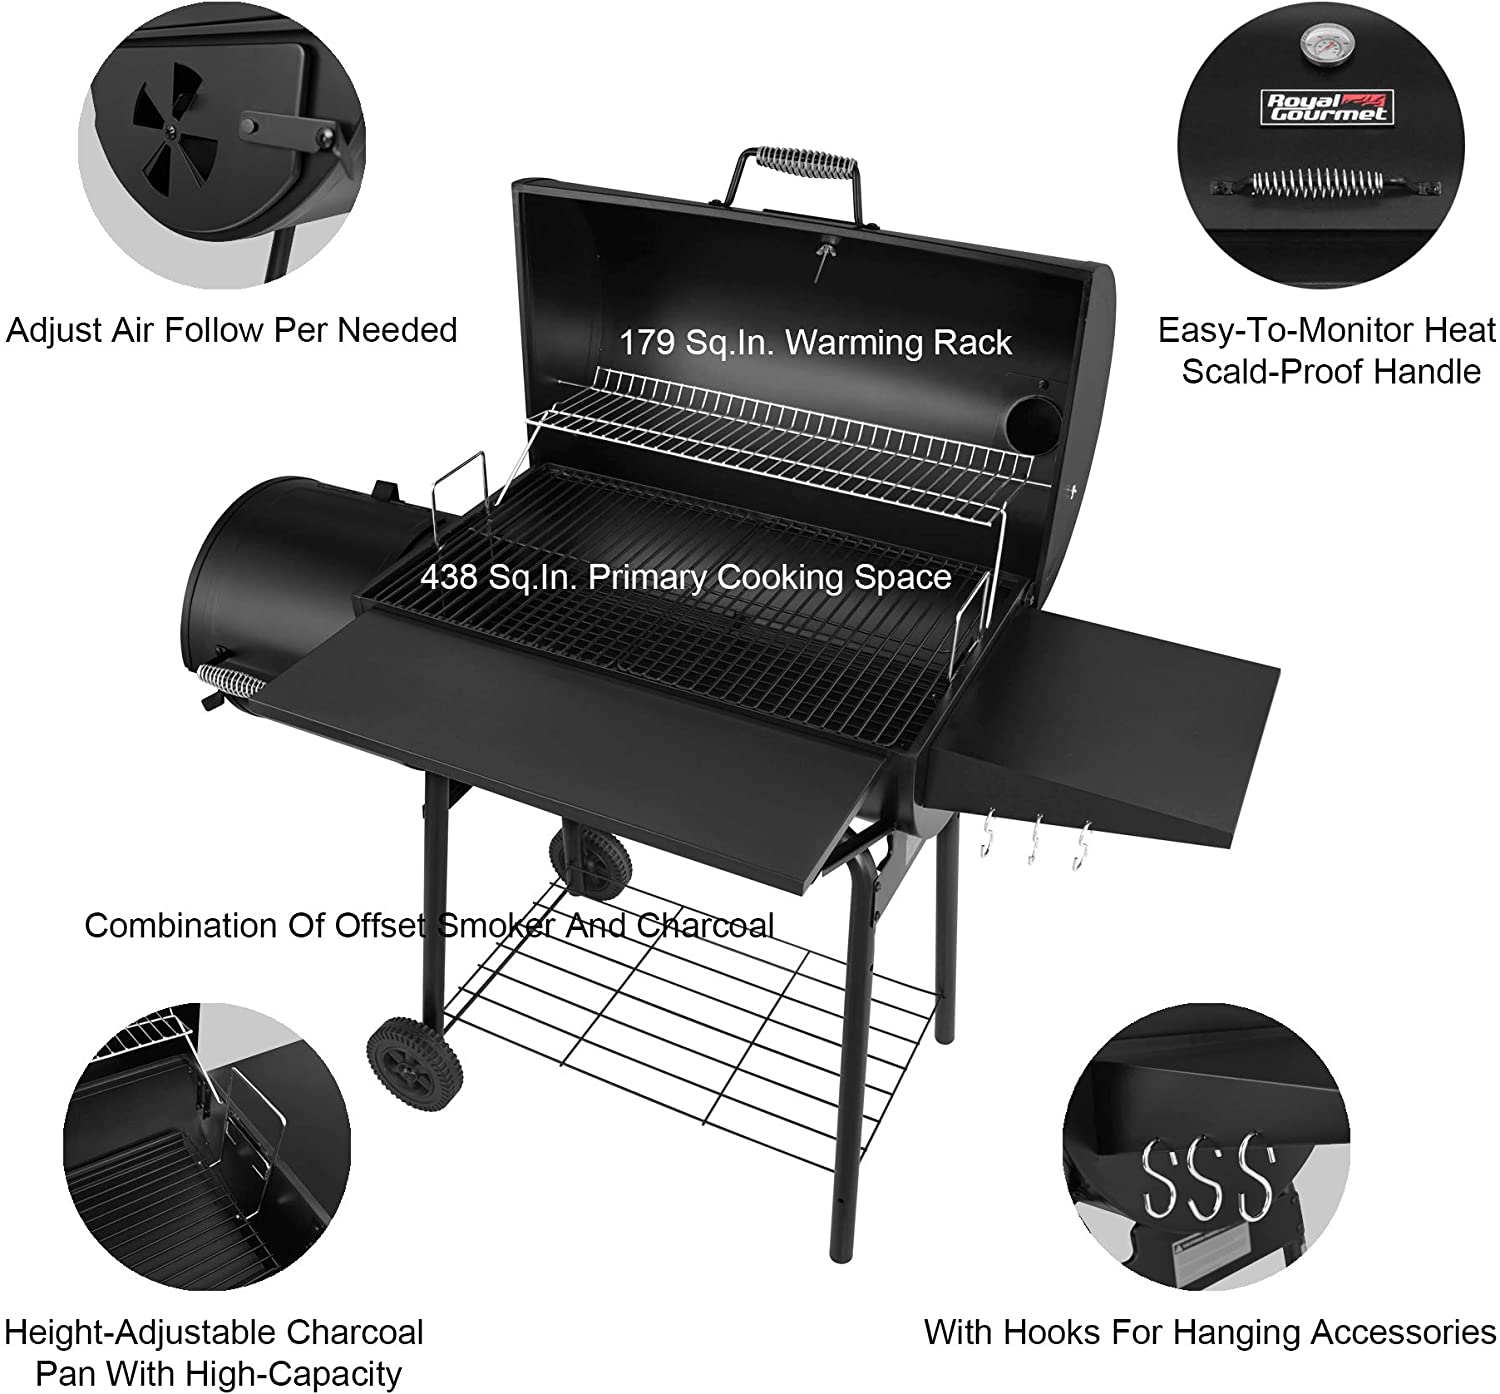 Royal Gourmet BBQ Charcoal Grill and Offset Smoker specs